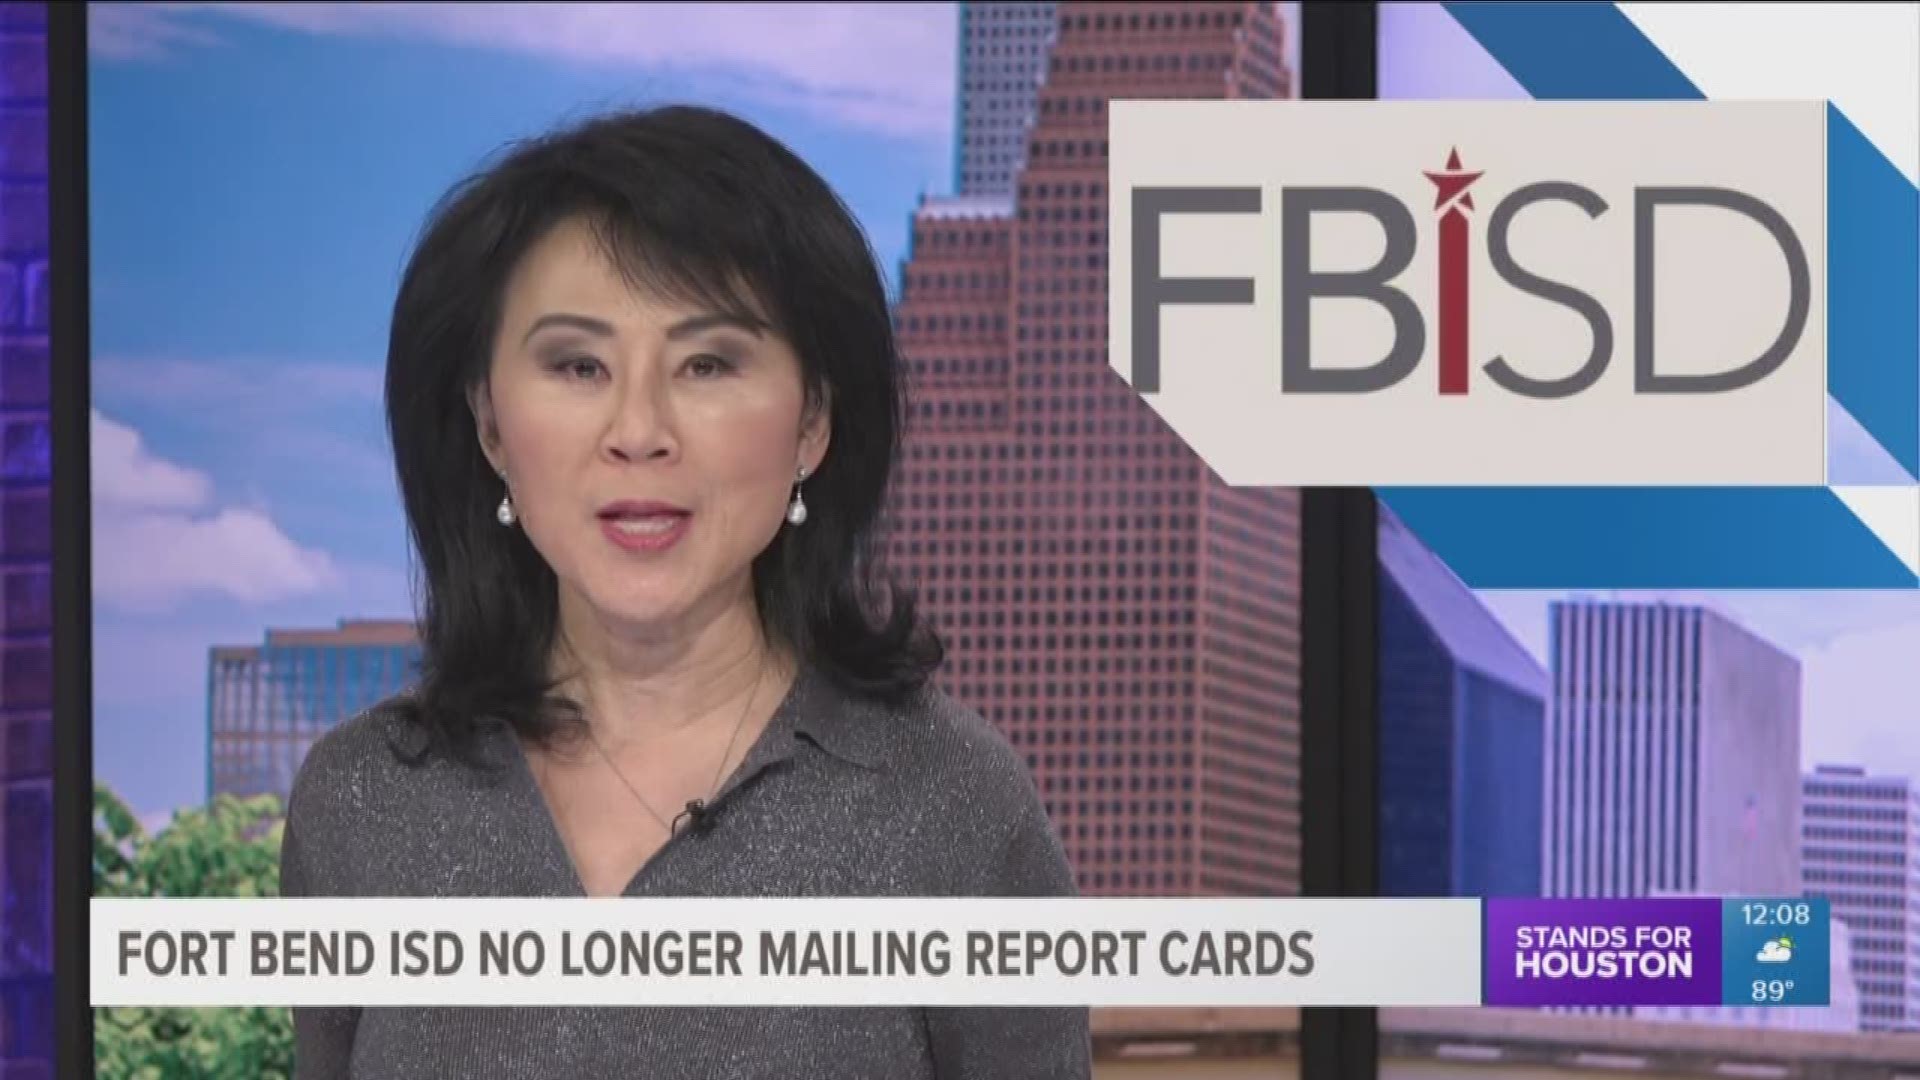 Parents of students in Fort Bend ISD won't need to check the mail for report cards this school year. The district says it will no longer mail out progress reports and report cards. Instead, parents will be able to access their child's grades online. 